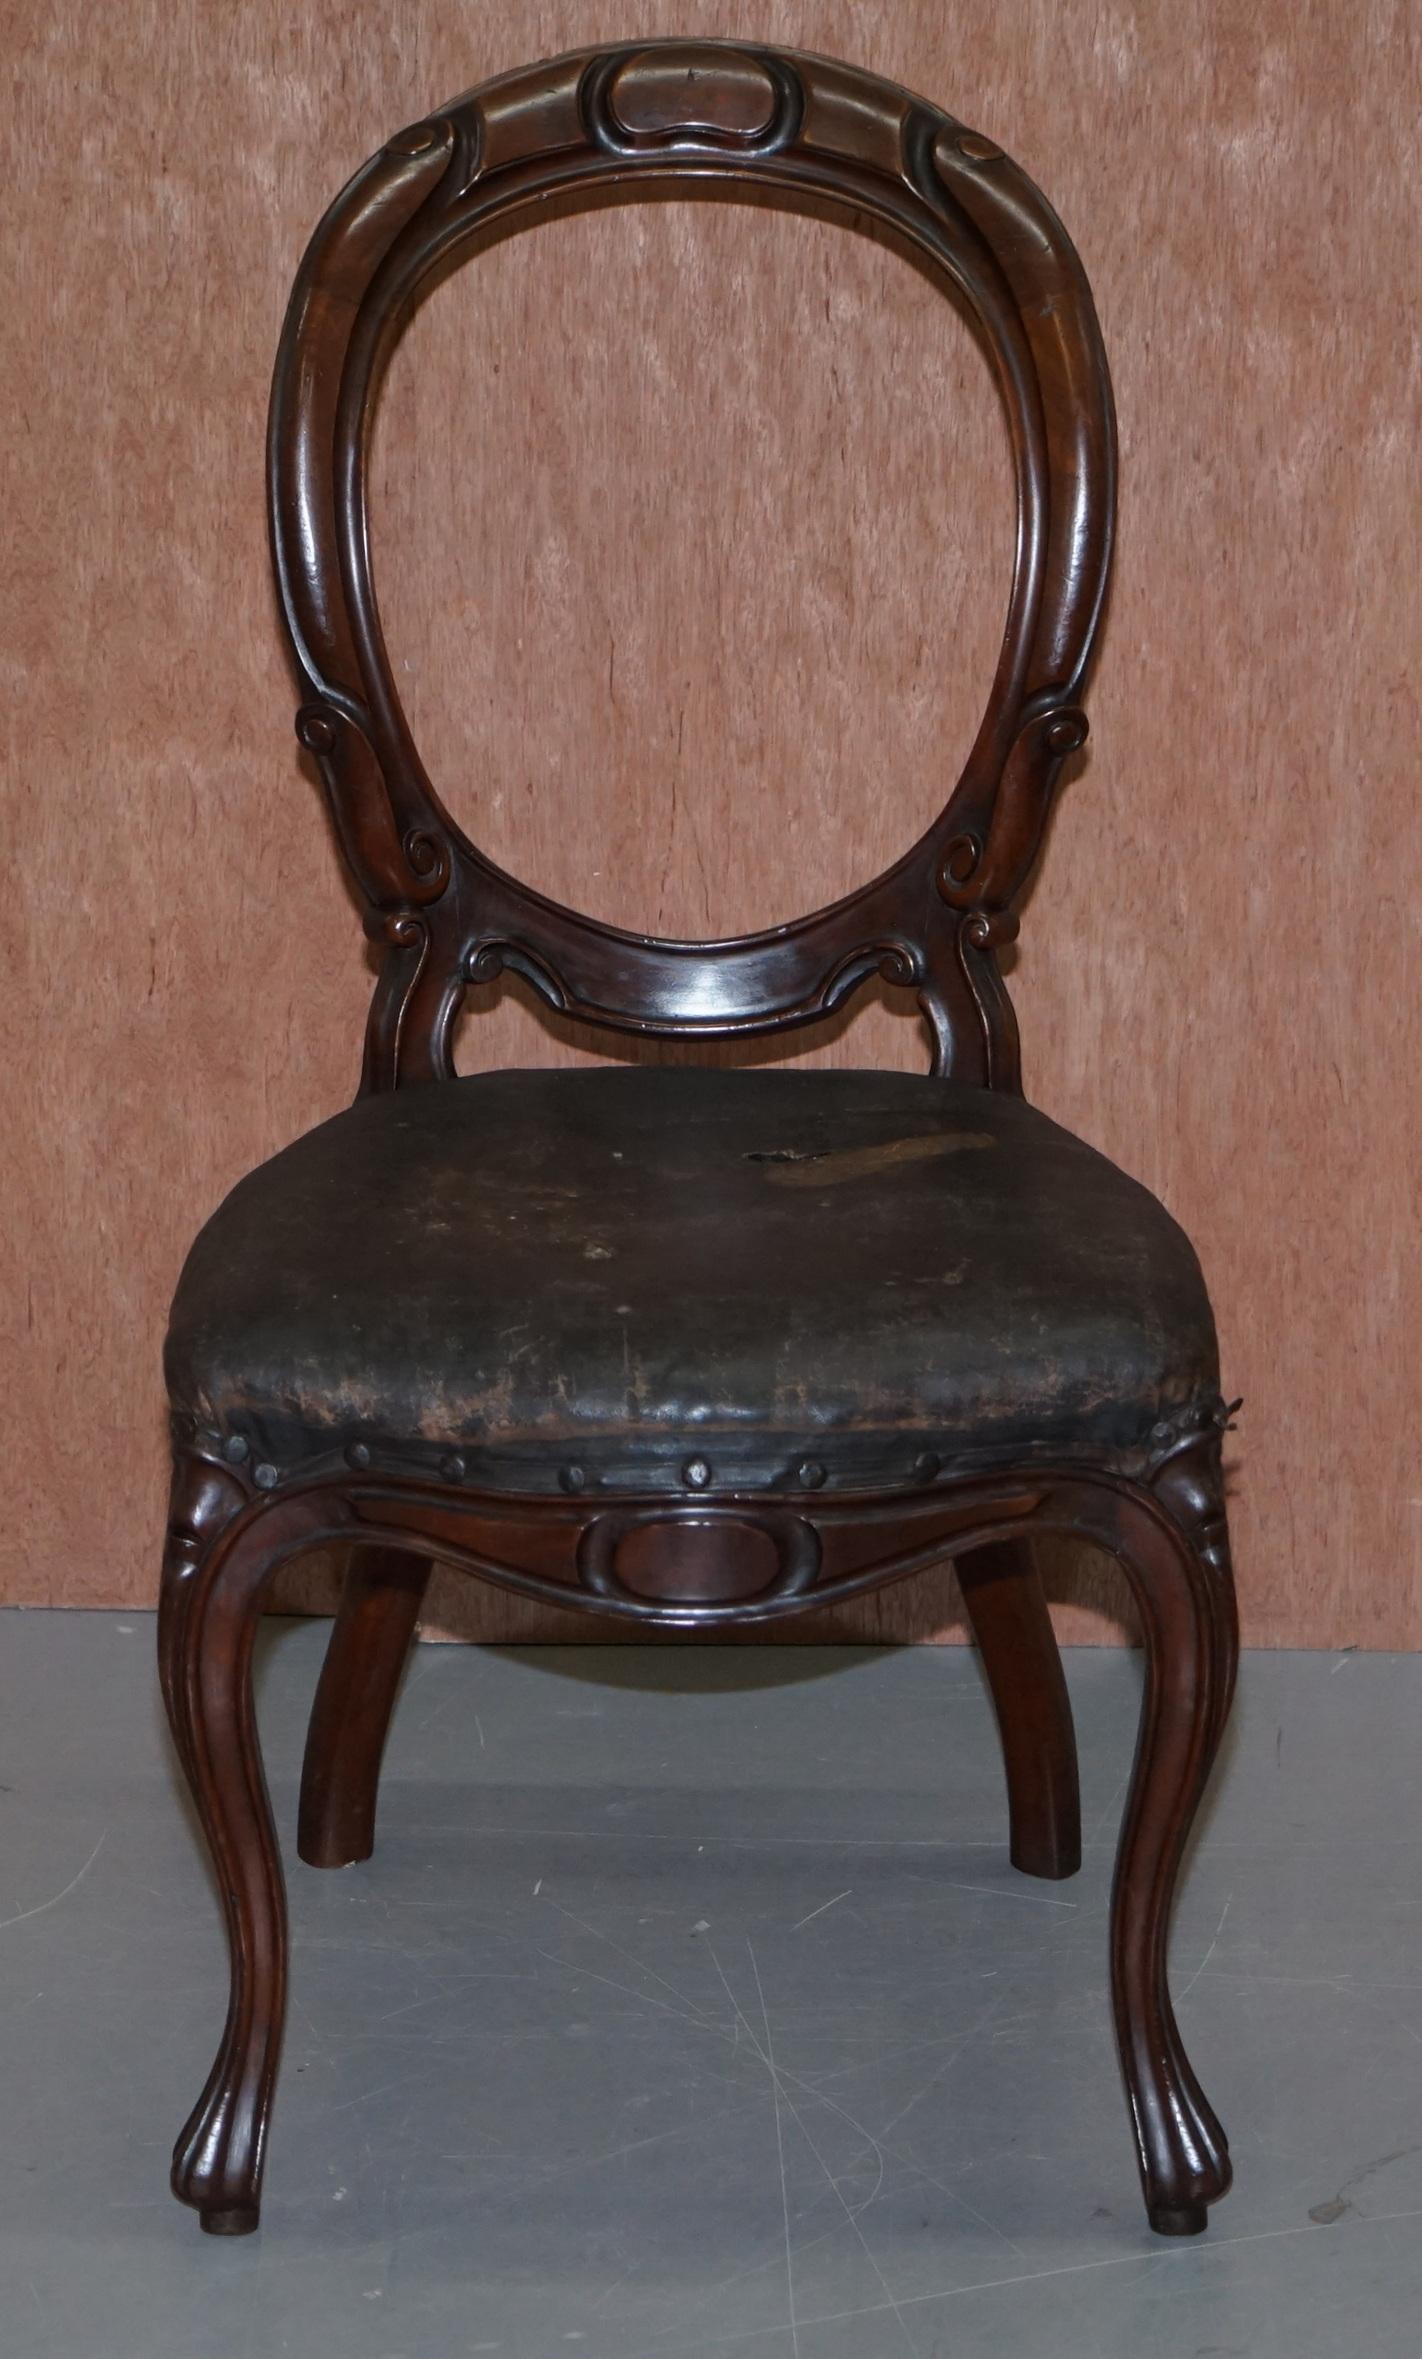 We are delighted to offer for sale this handmade original Victorian spoon or medallion back dining chair with original upholstery

A good looking well made and decorative chair. The frame is sublime, ornately carved and handmade. The upholstery is